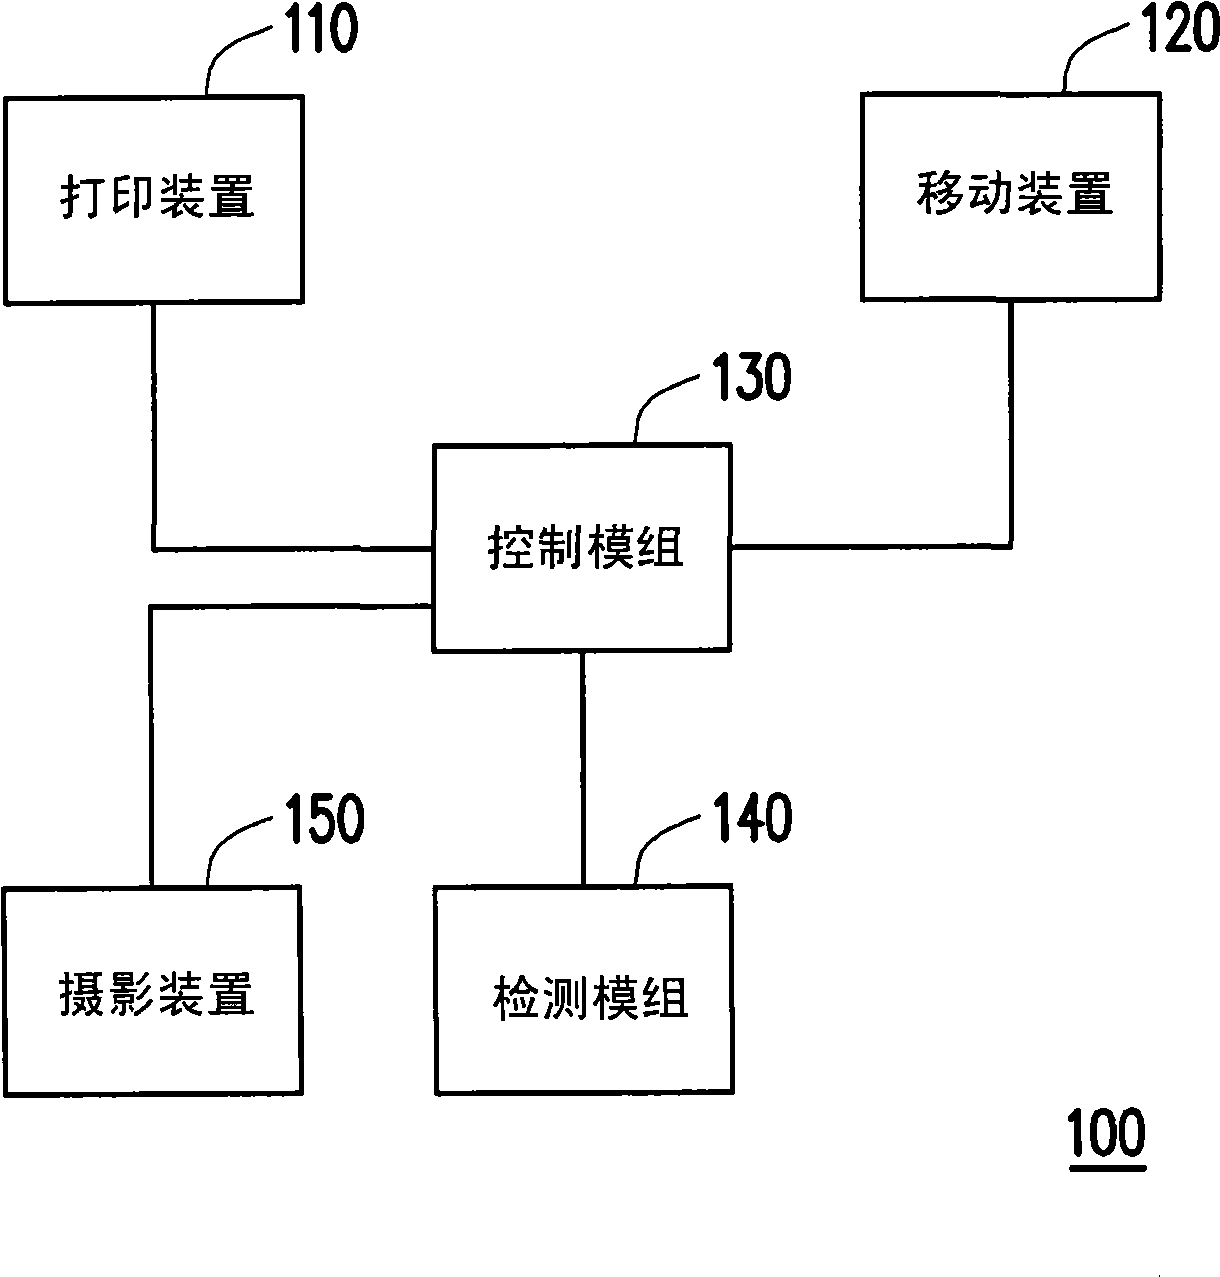 Self-propelled printer having orientation adjusting device and method for setting coordinate